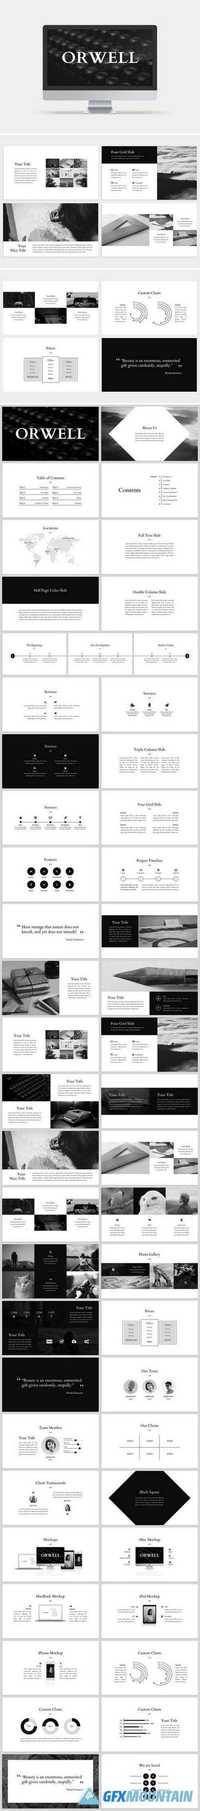 Orwell PowerPoint Template 752713